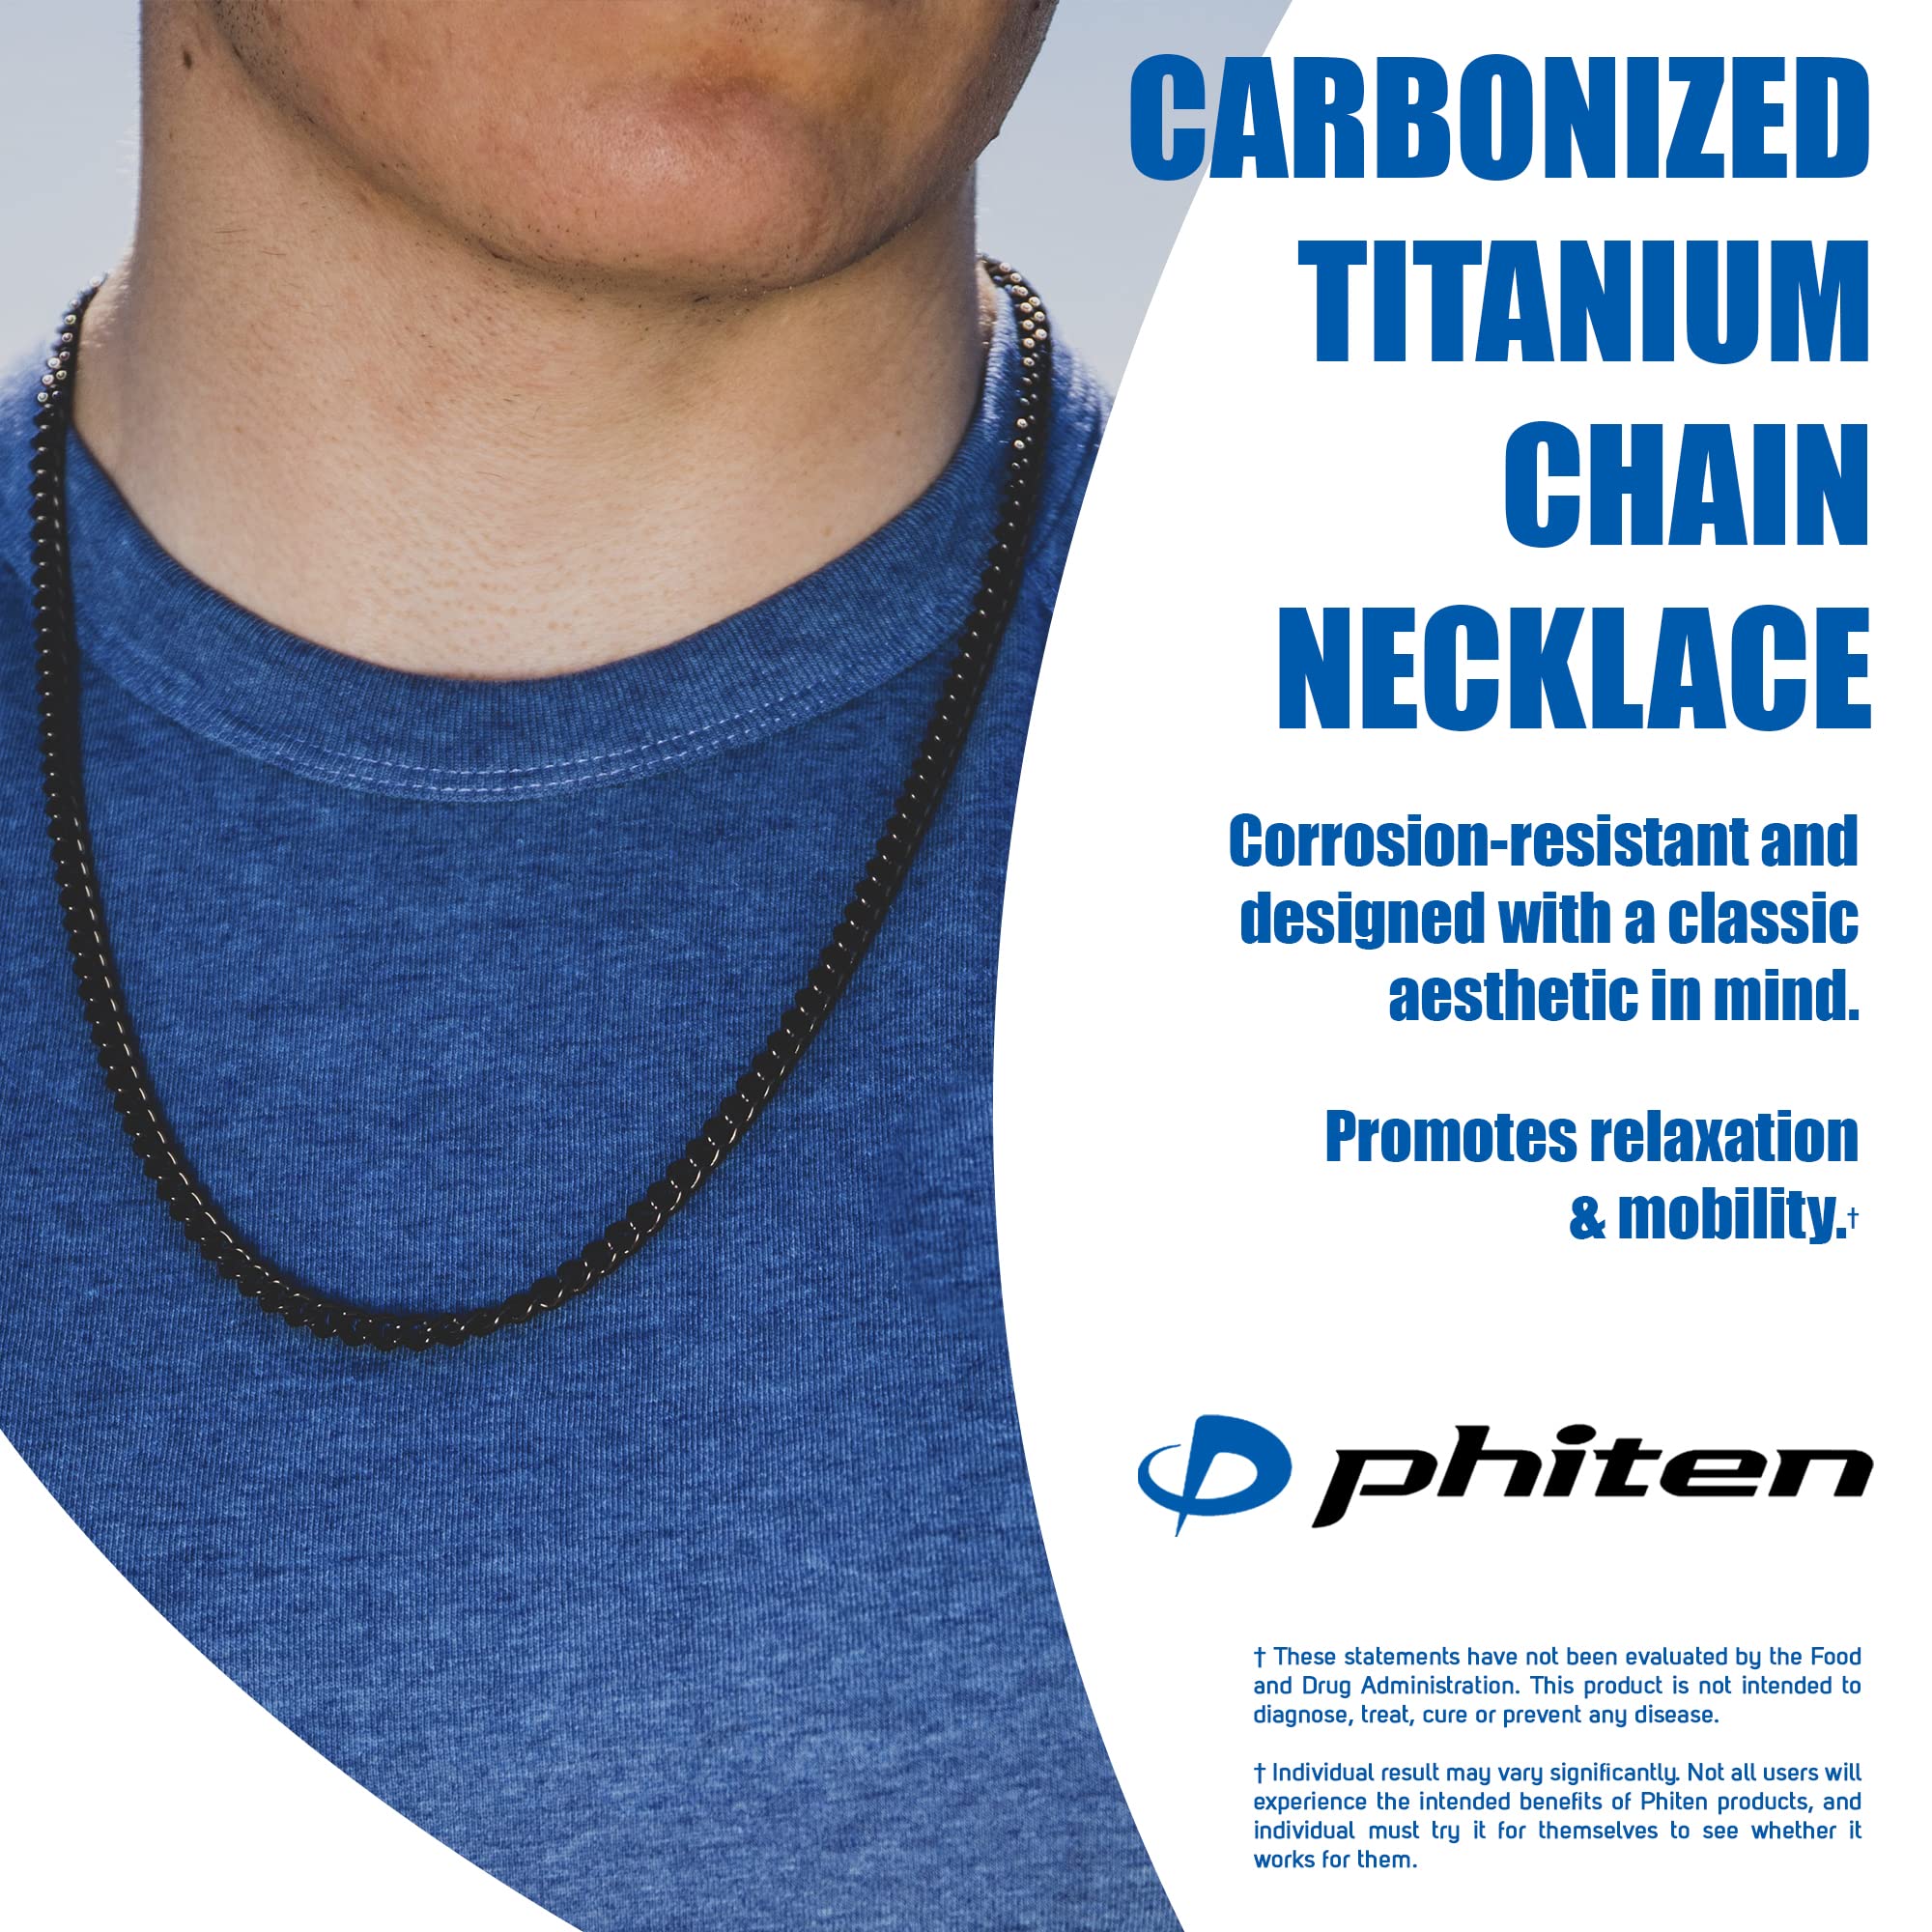 Phiten Carbonized Titanium Chain Necklace - Corrosion-Resistant, Lightweight, Pure Premium Grade for Sports, Gym, and Athletics for Men and Women, Black